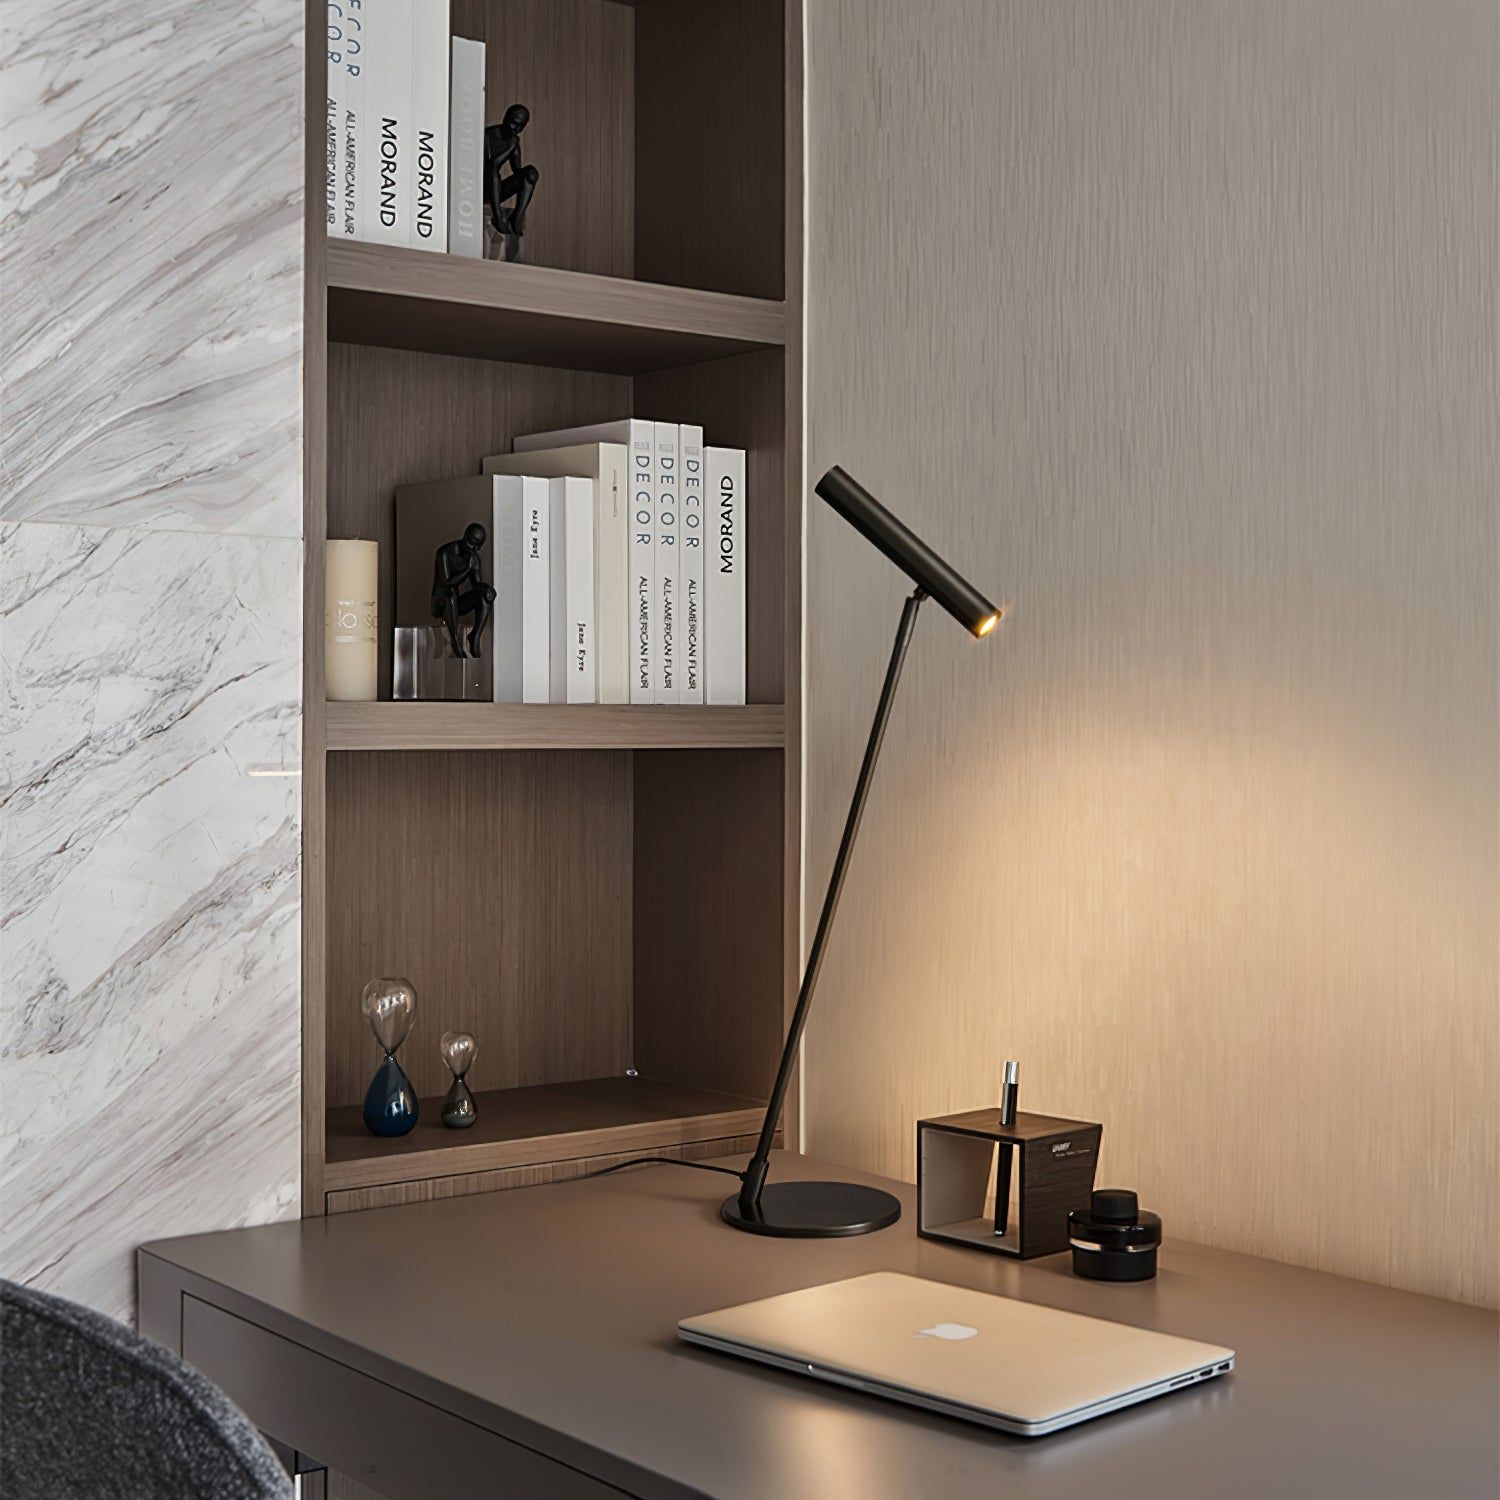 The Benefits of Using a LED Table Lamp for Reading: Enhance Your Reading Experience with Better Light Quality